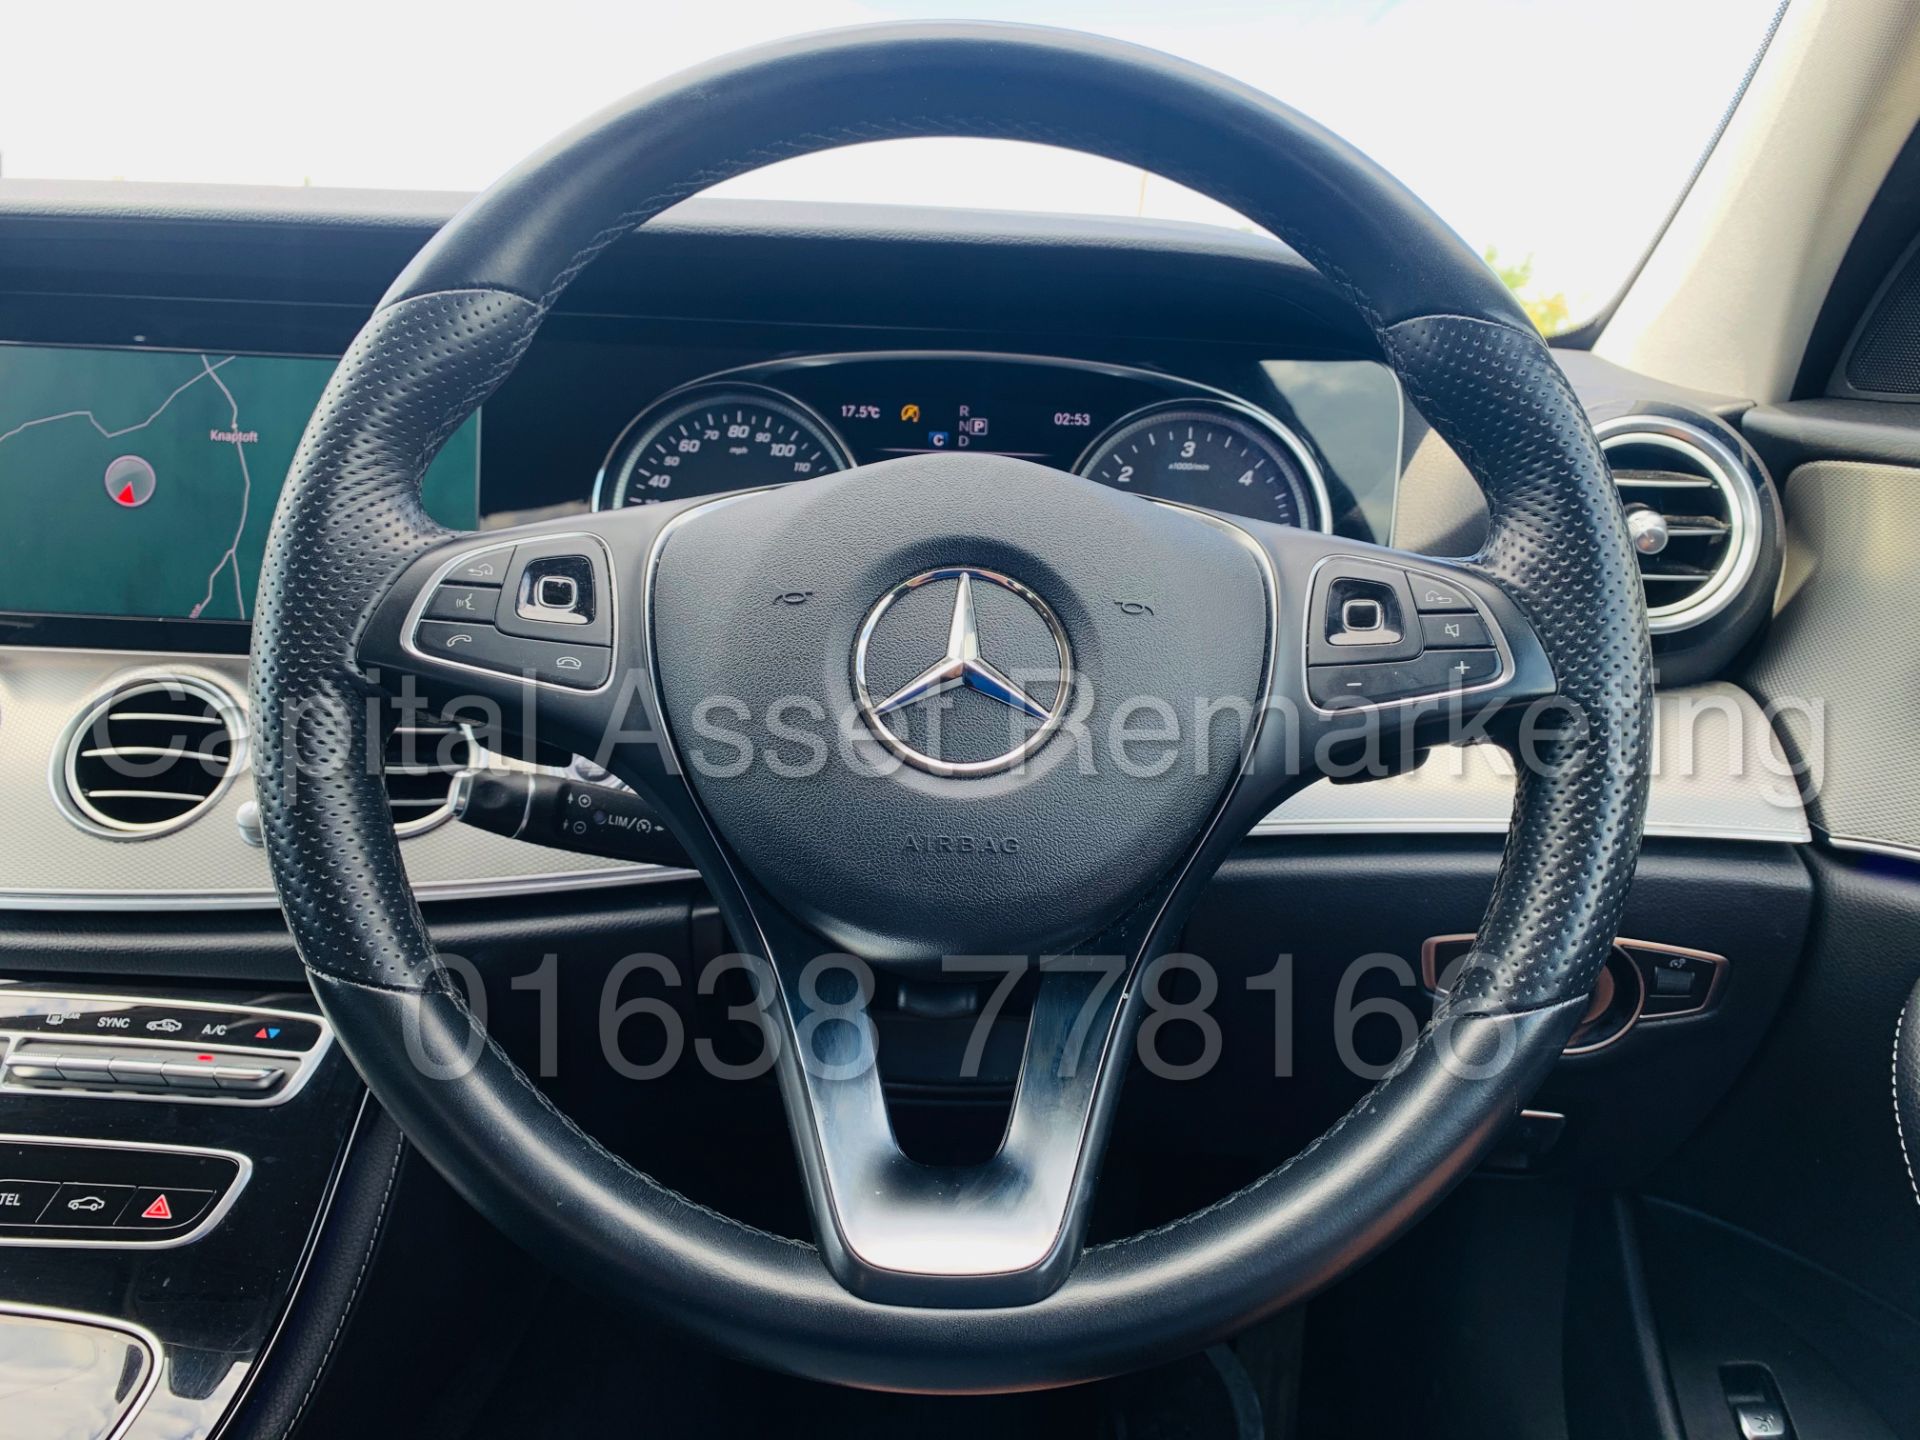 (On Sale) MERCEDES-BENZ E220D *SALOON* (2018 - NEW MODEL) '9-G TRONIC AUTO - LEATHER - SAT NAV' - Image 54 of 56